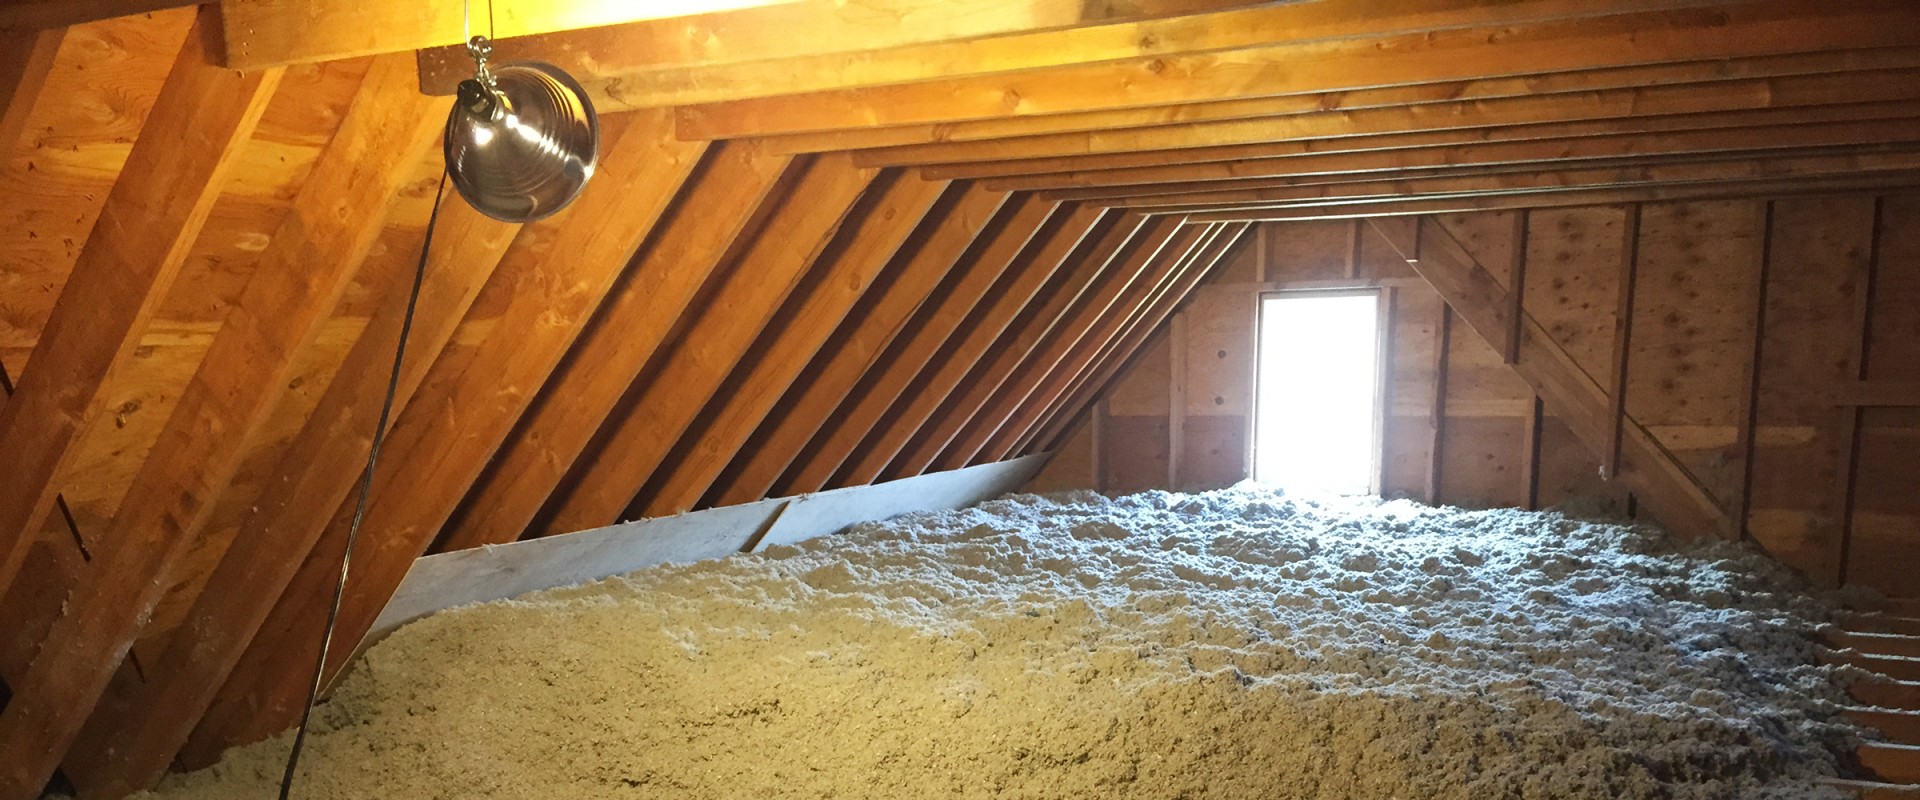 Insulating Your Attic in Davie, FL: The Best Types of Insulation